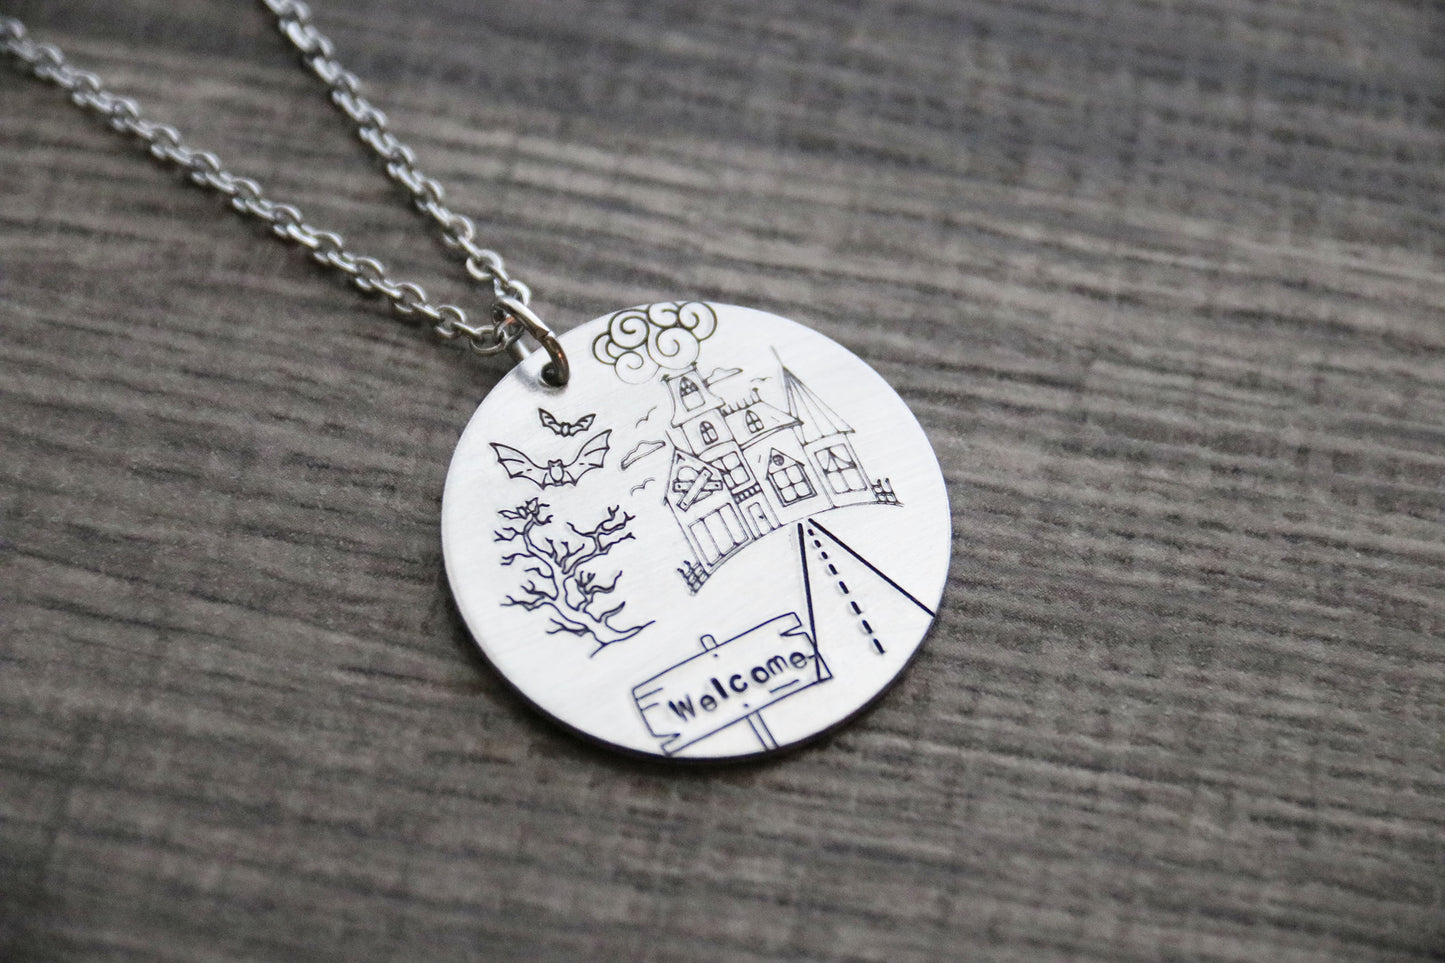 Haunted House Necklace Hand Stamped, Personalized Optional